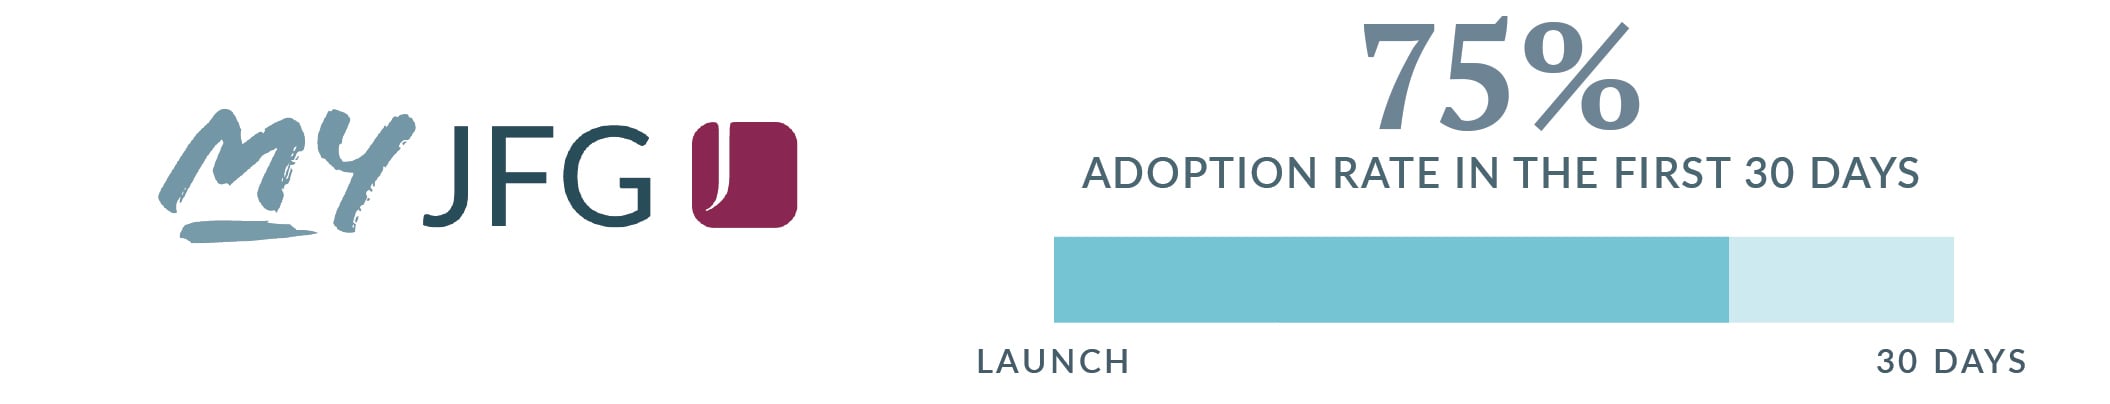 MyJFG had a 75% adoption rate in the first 30 days